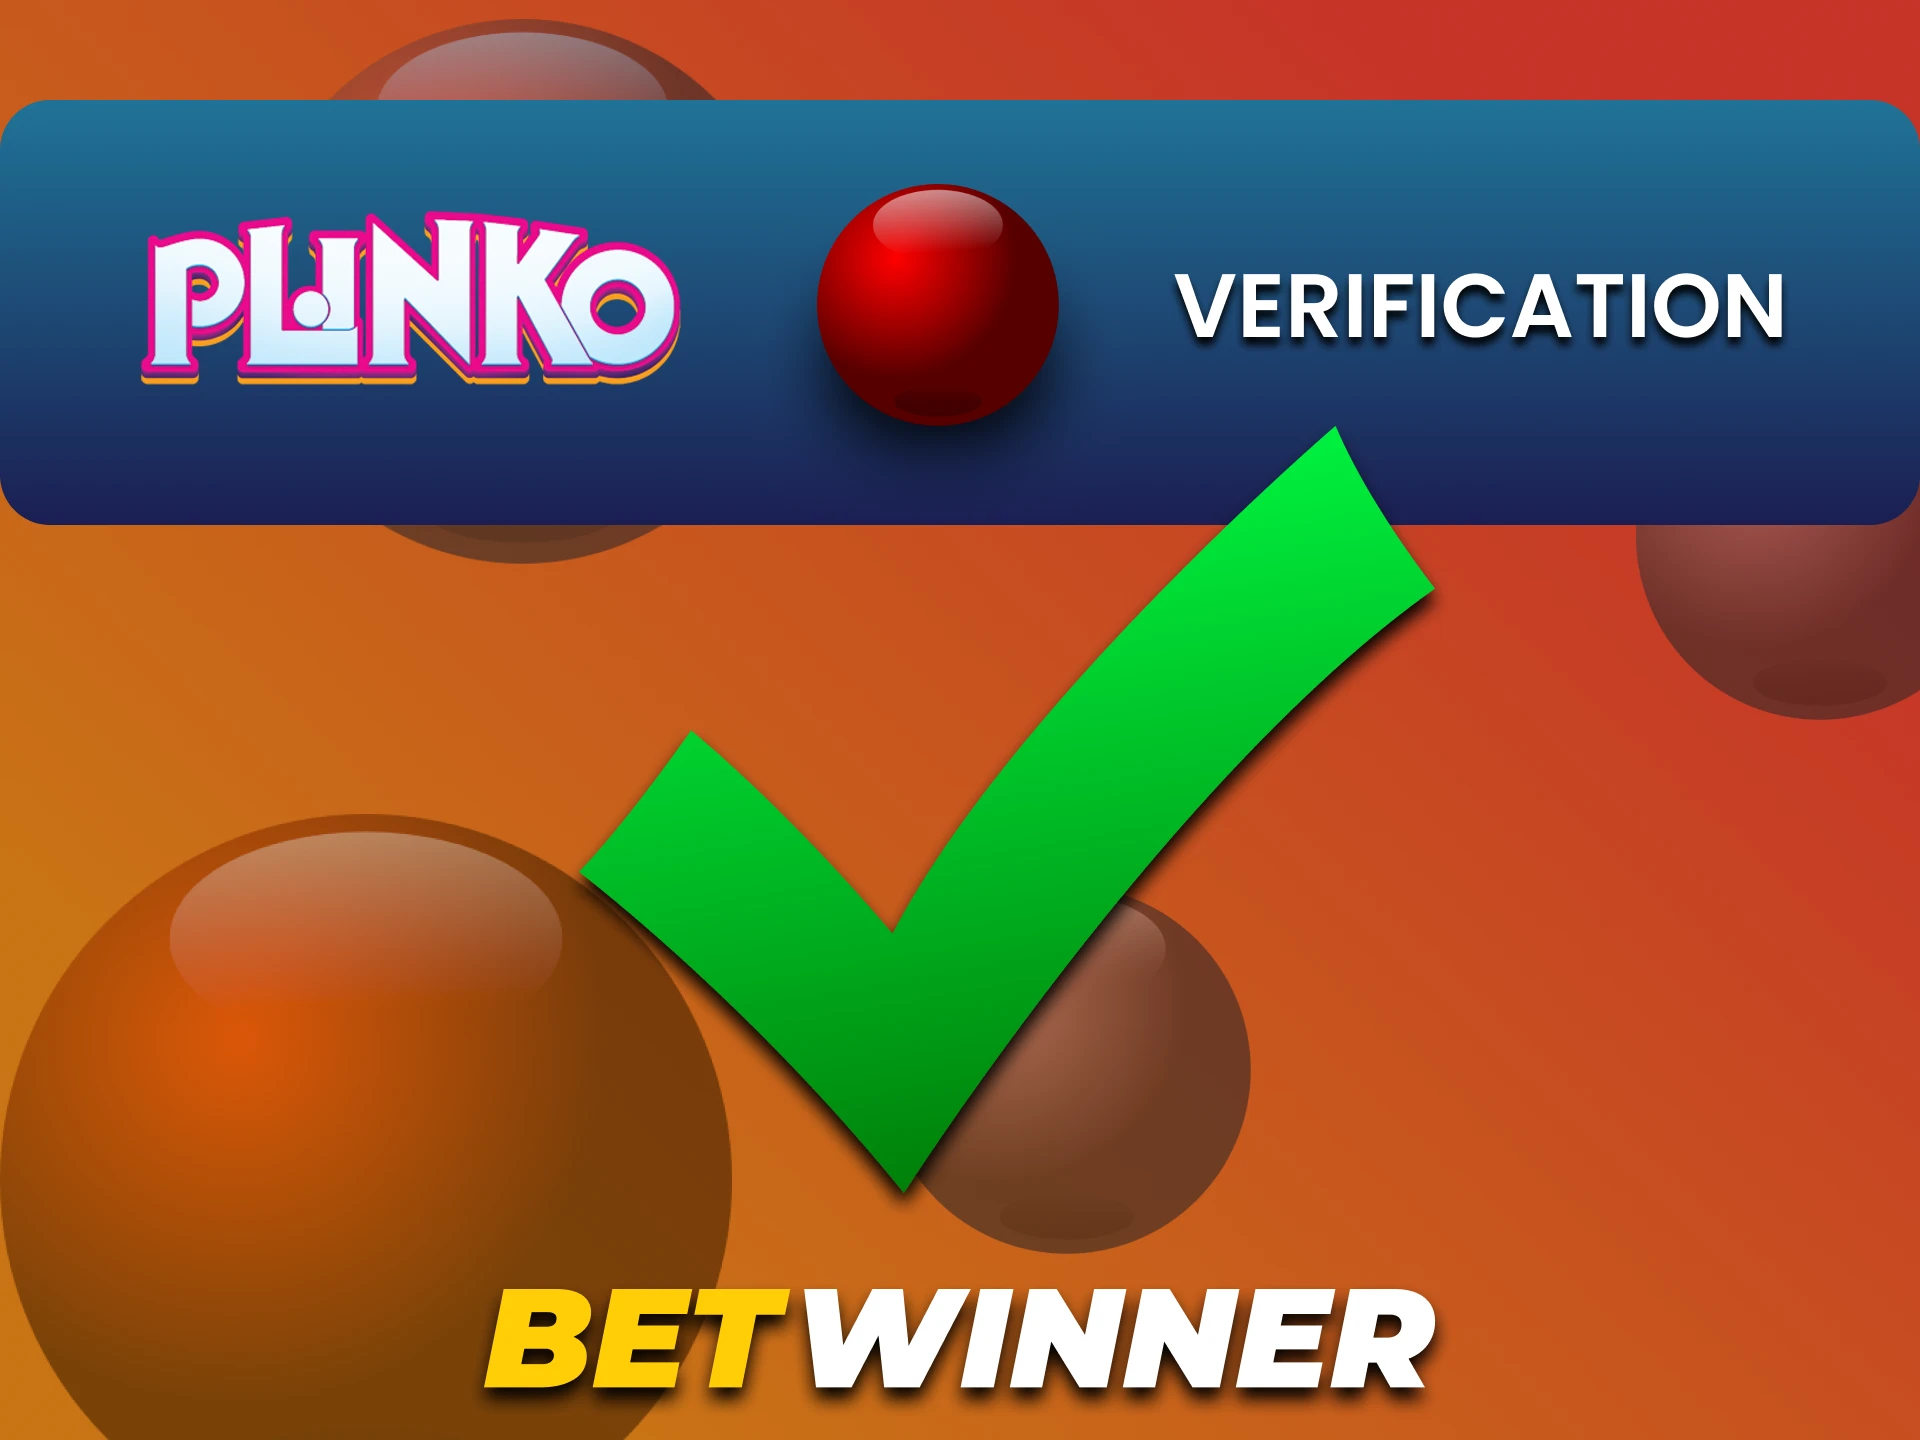 Fill in your account details to play Plinko on Betwinner.